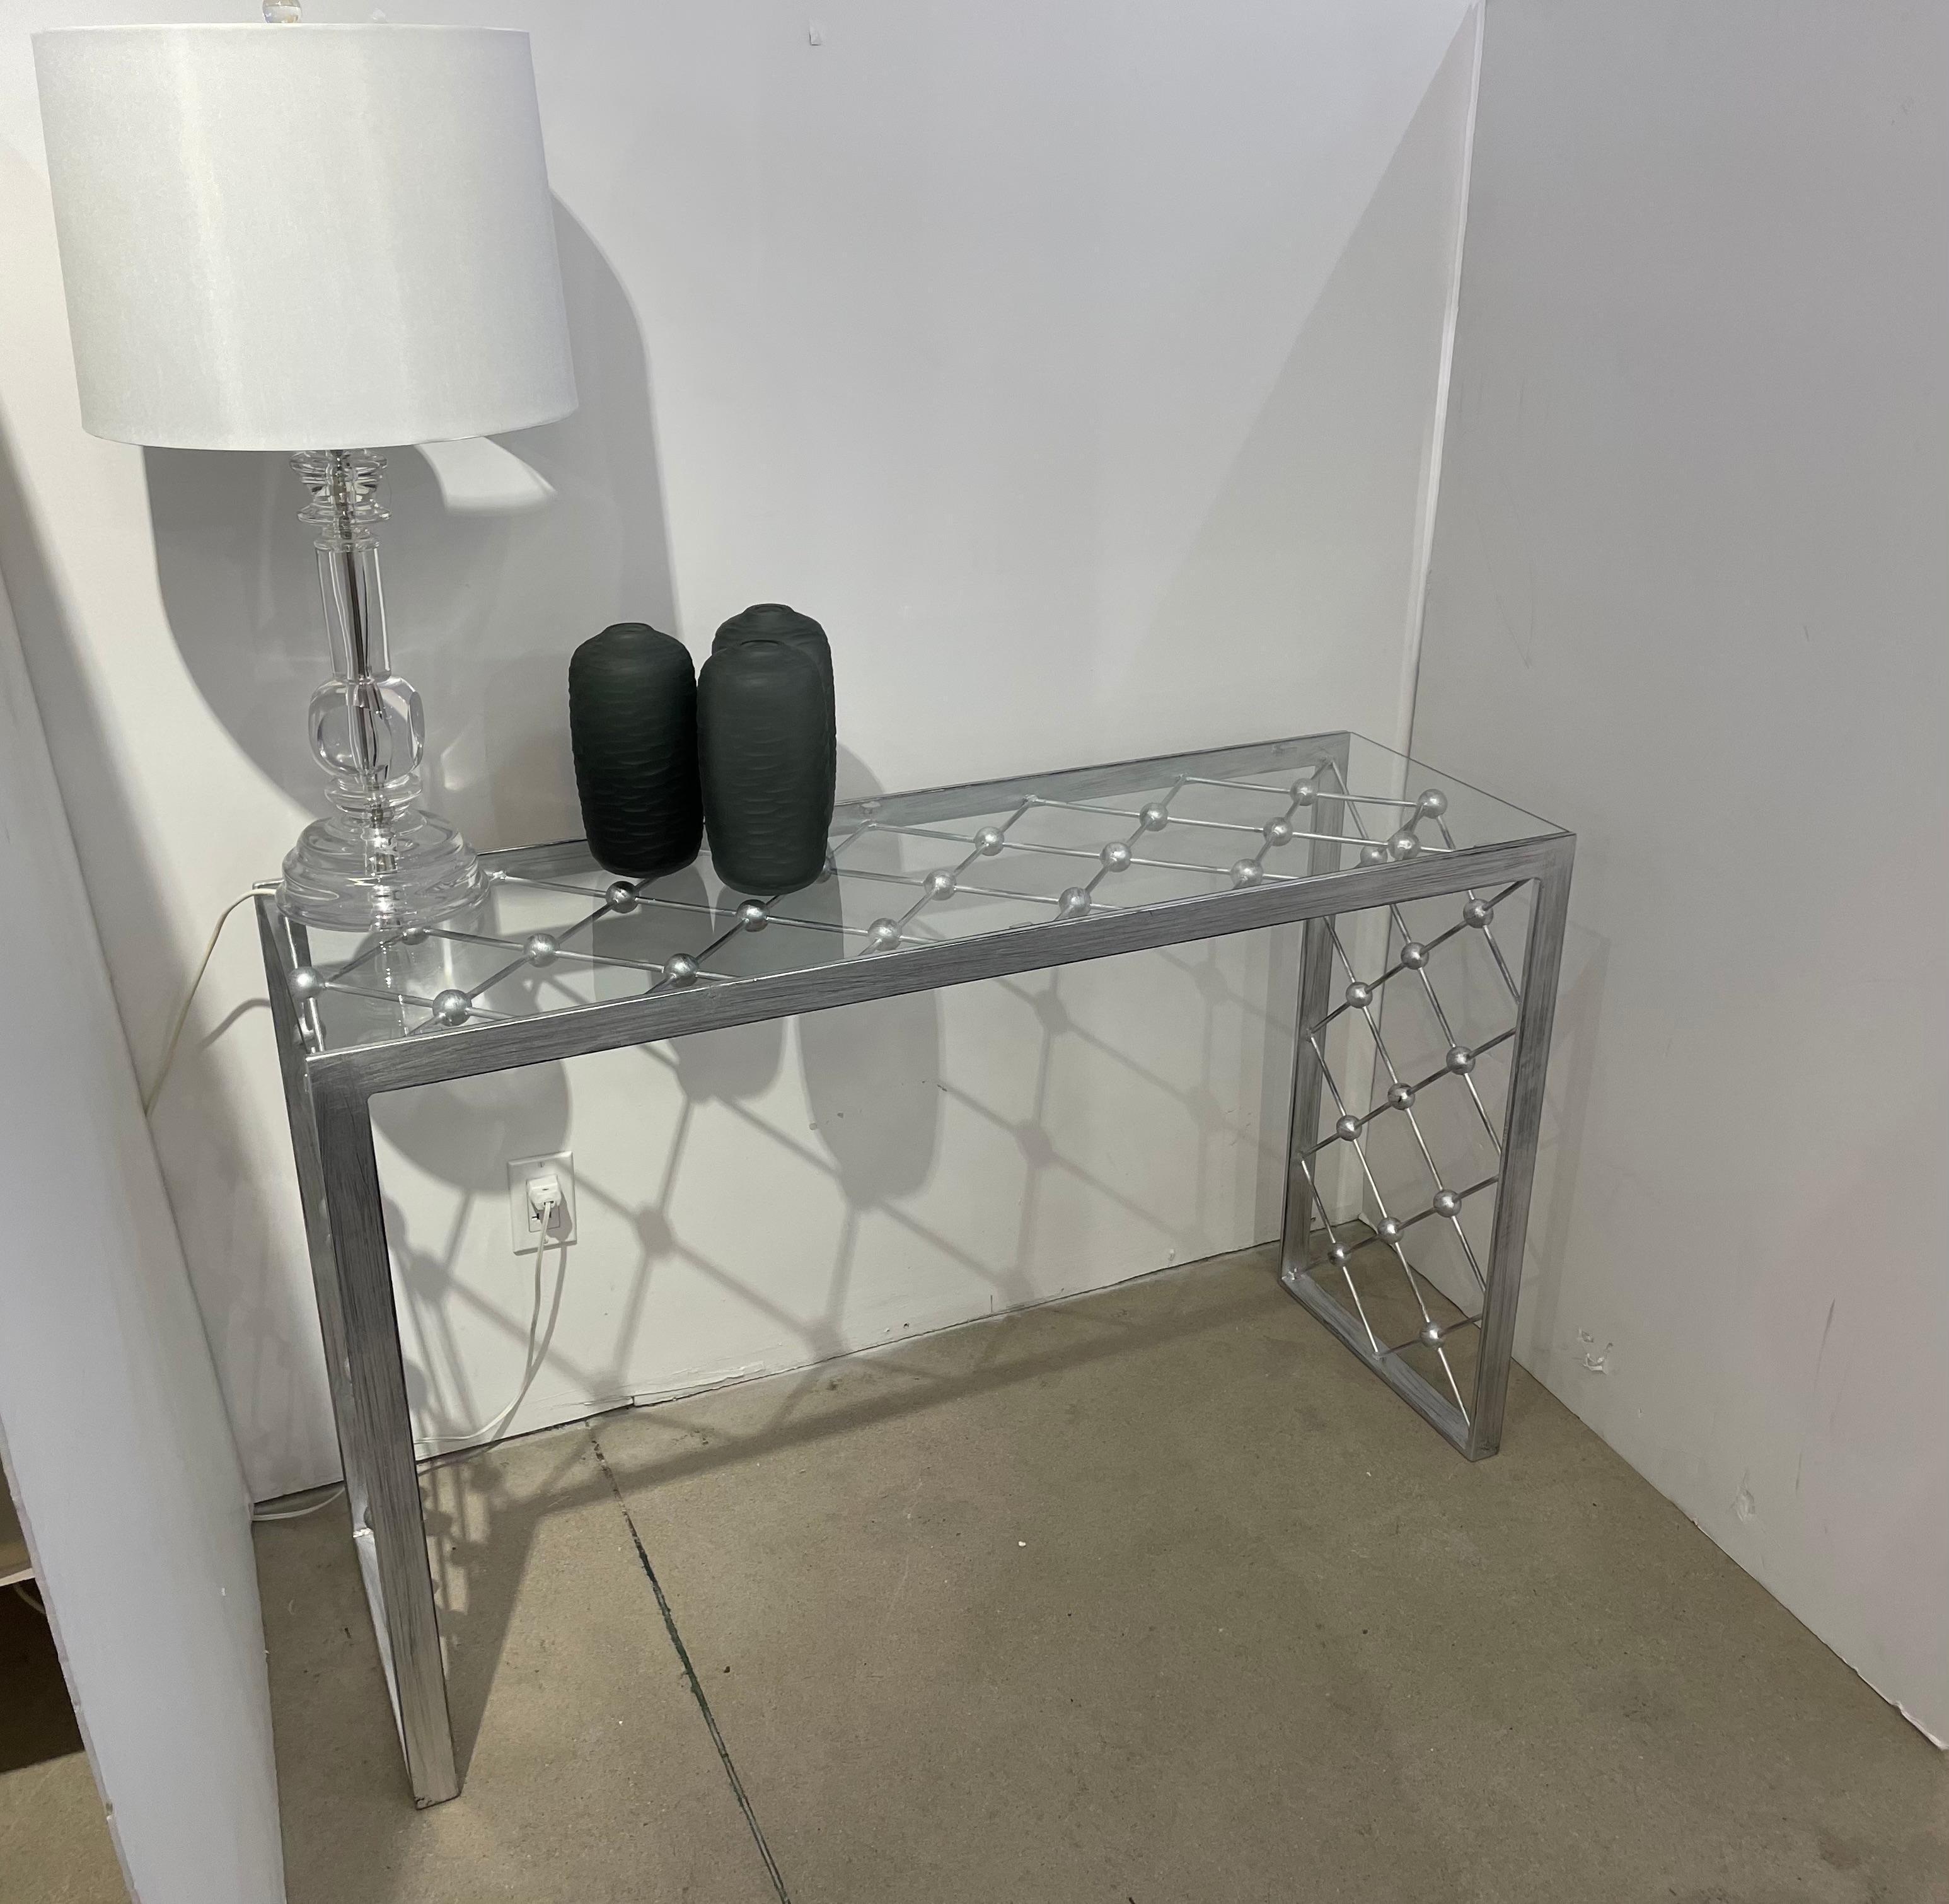 Italian Modern Industrial Design Criss Cross Fretwork Iron Console / Entry Table For Sale 7